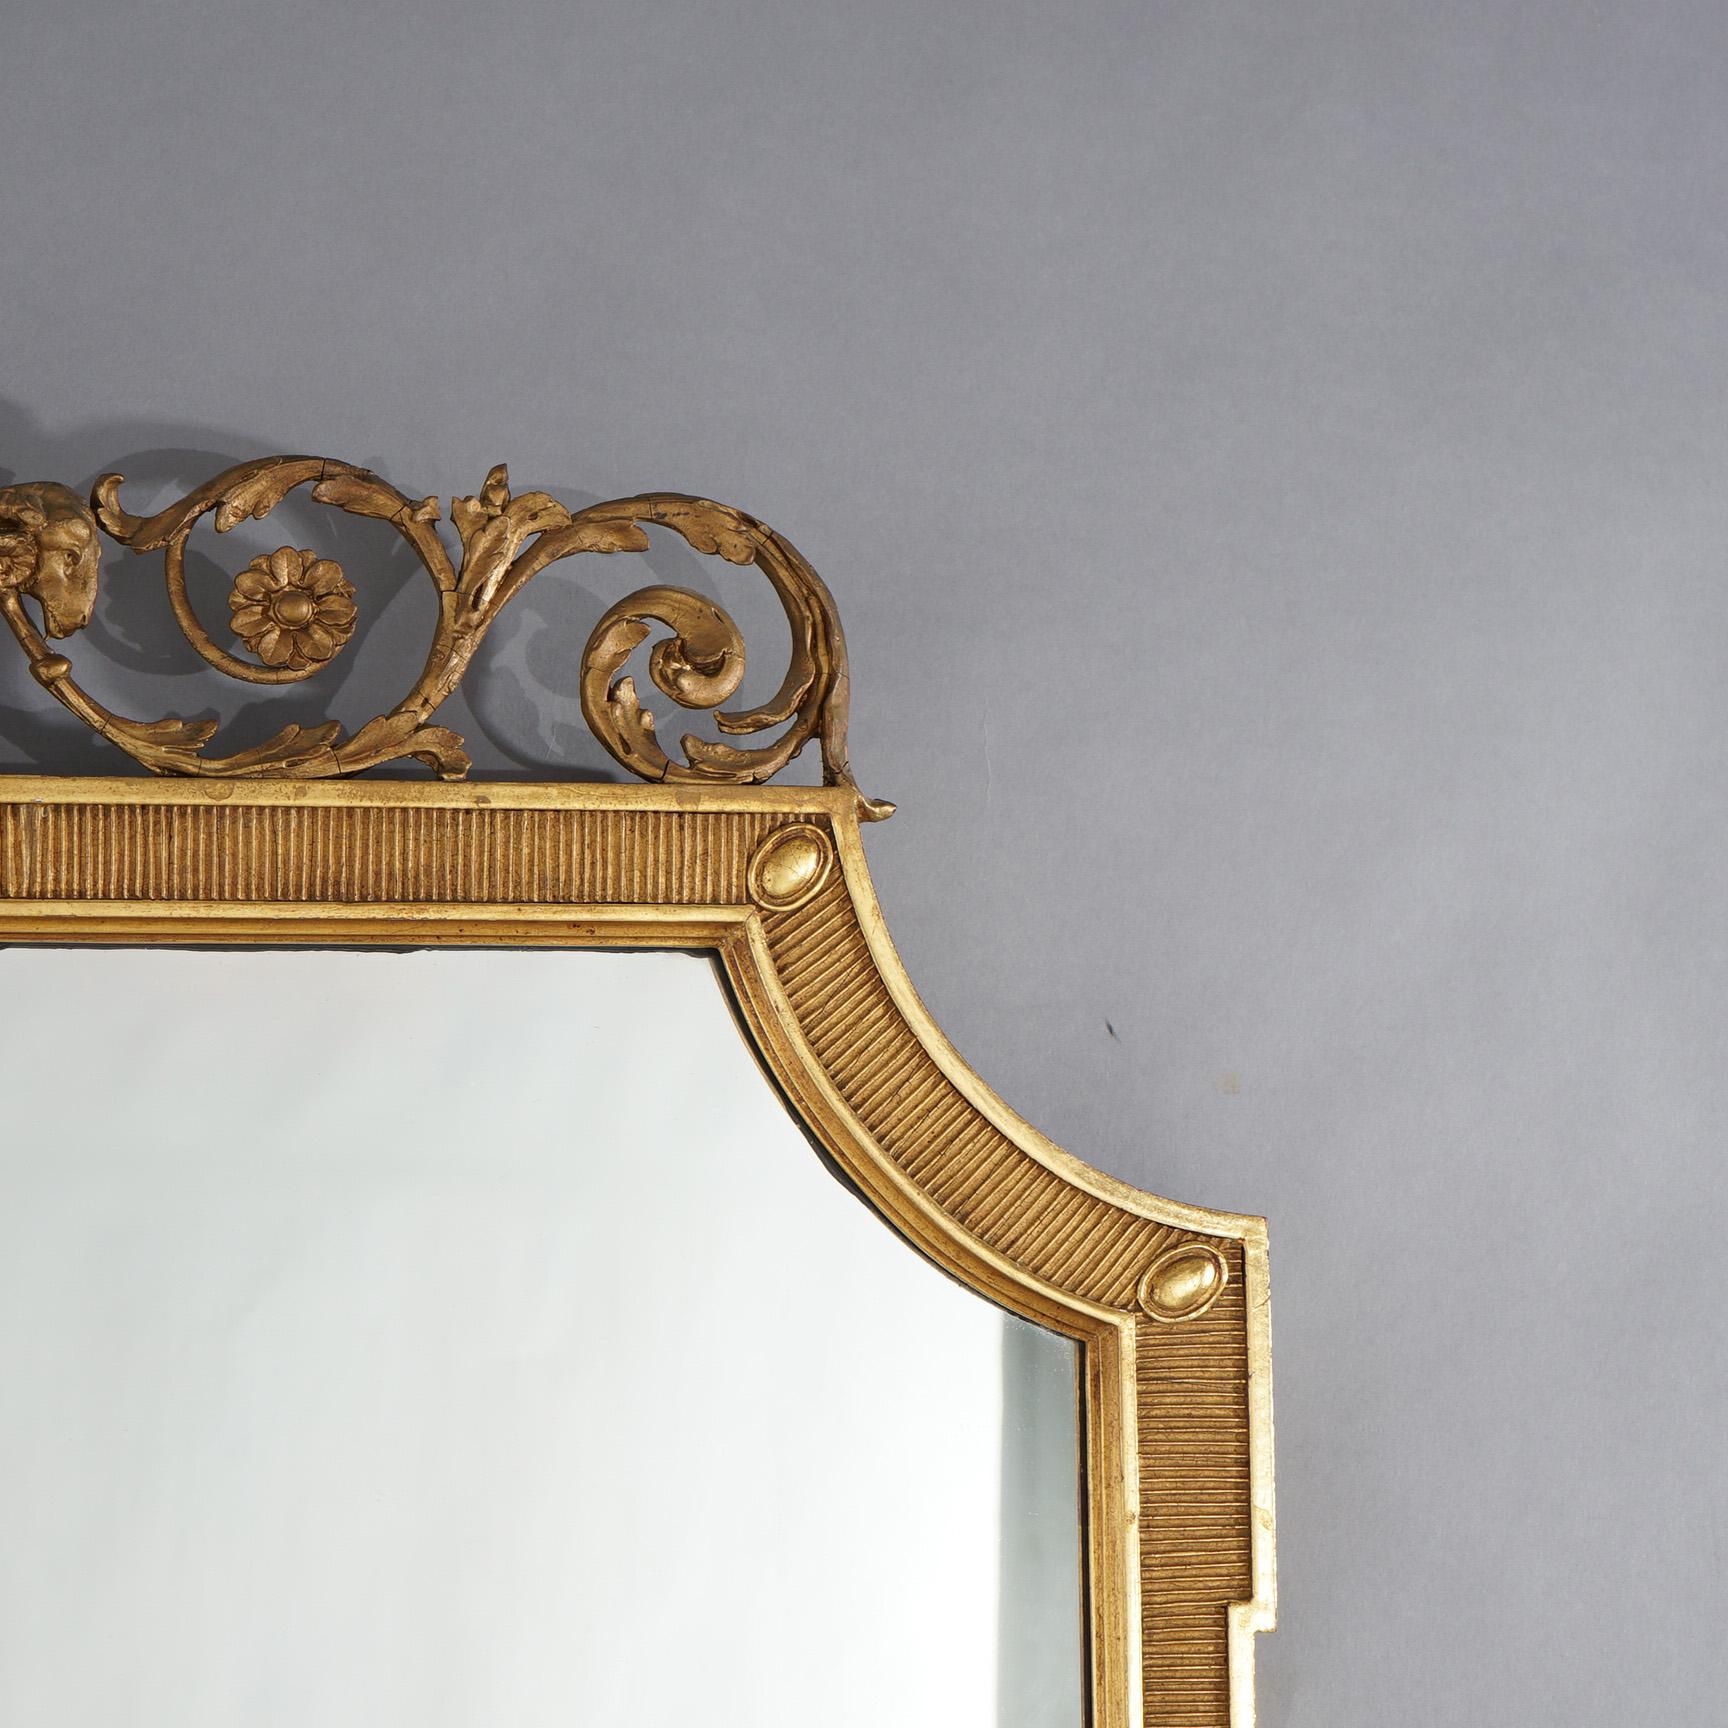 20th Century Antique French Empire Oversized Giltwood Wall Mirror C1920 For Sale